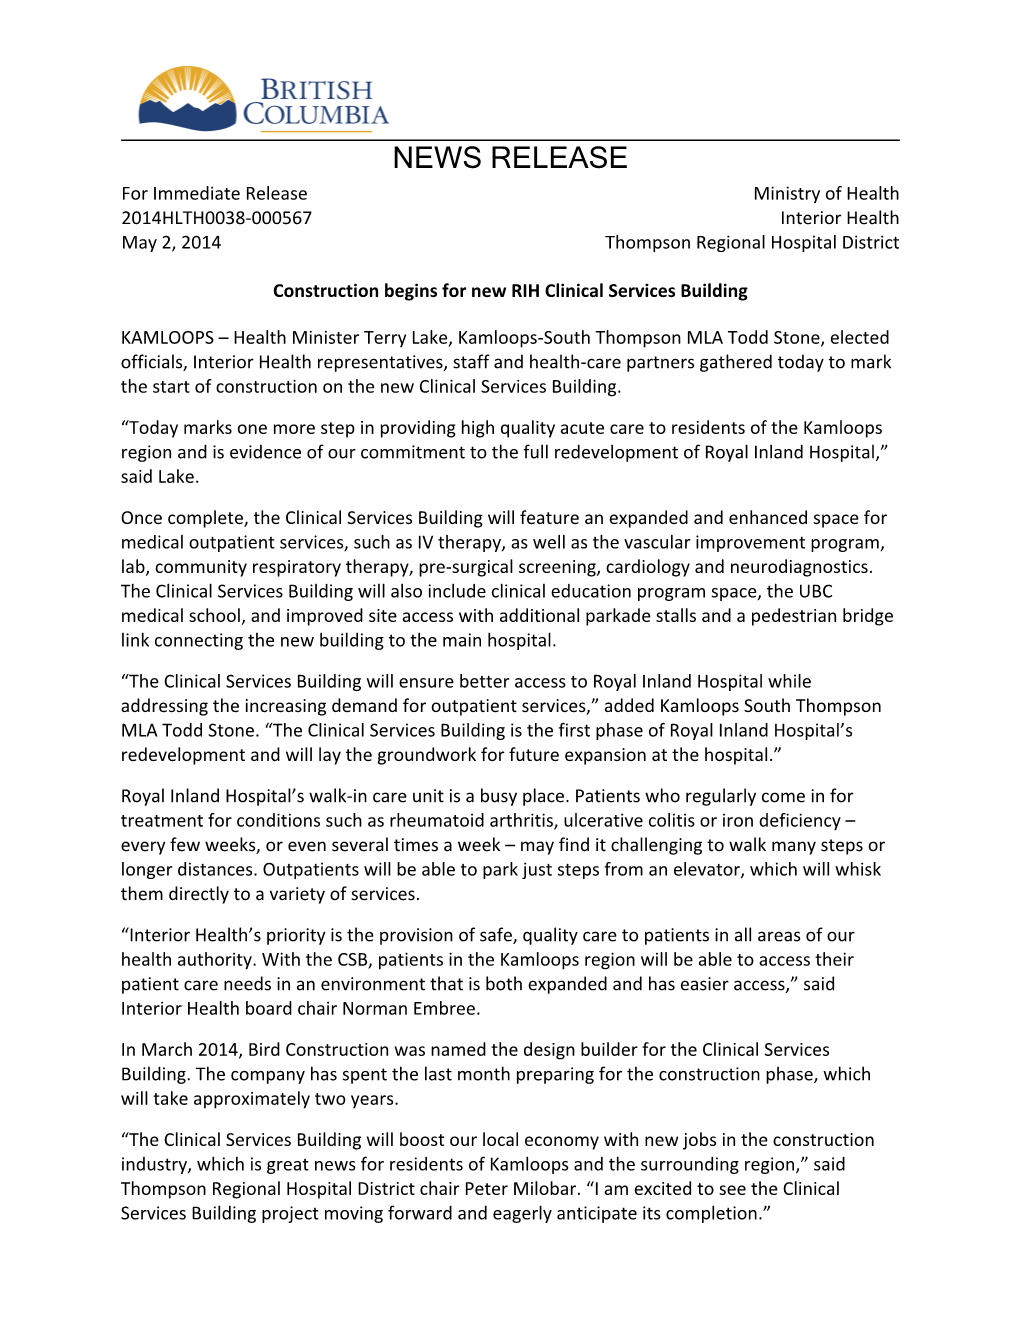 NEWS RELEASE for Immediate Release Ministry of Health 2014HLTH0038-000567 Interior Health May 2, 2014 Thompson Regional Hospital District